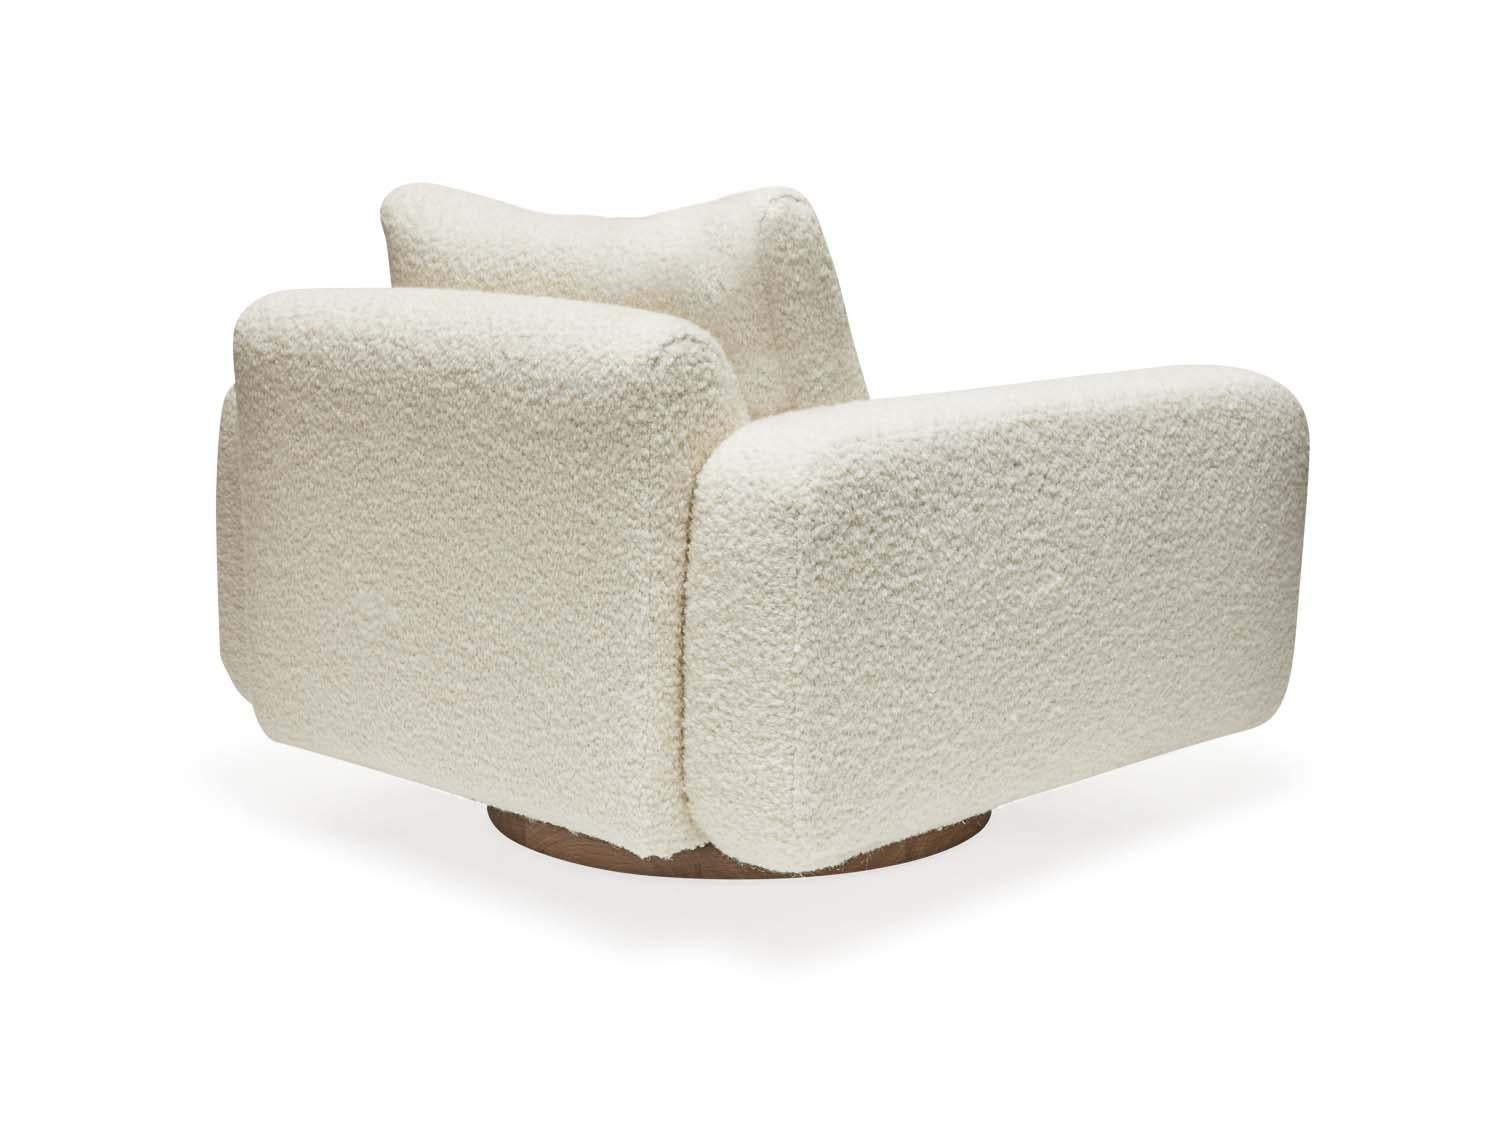 Mesa swivel chair by Lawson-Fenning in white Alpaca Boucle. The Mesa swivel chair is a fully upholstered club chair that features a walnut or oak inset base.

The Lawson-Fenning Collection is designed and handmade in Los Angeles, California. Reach